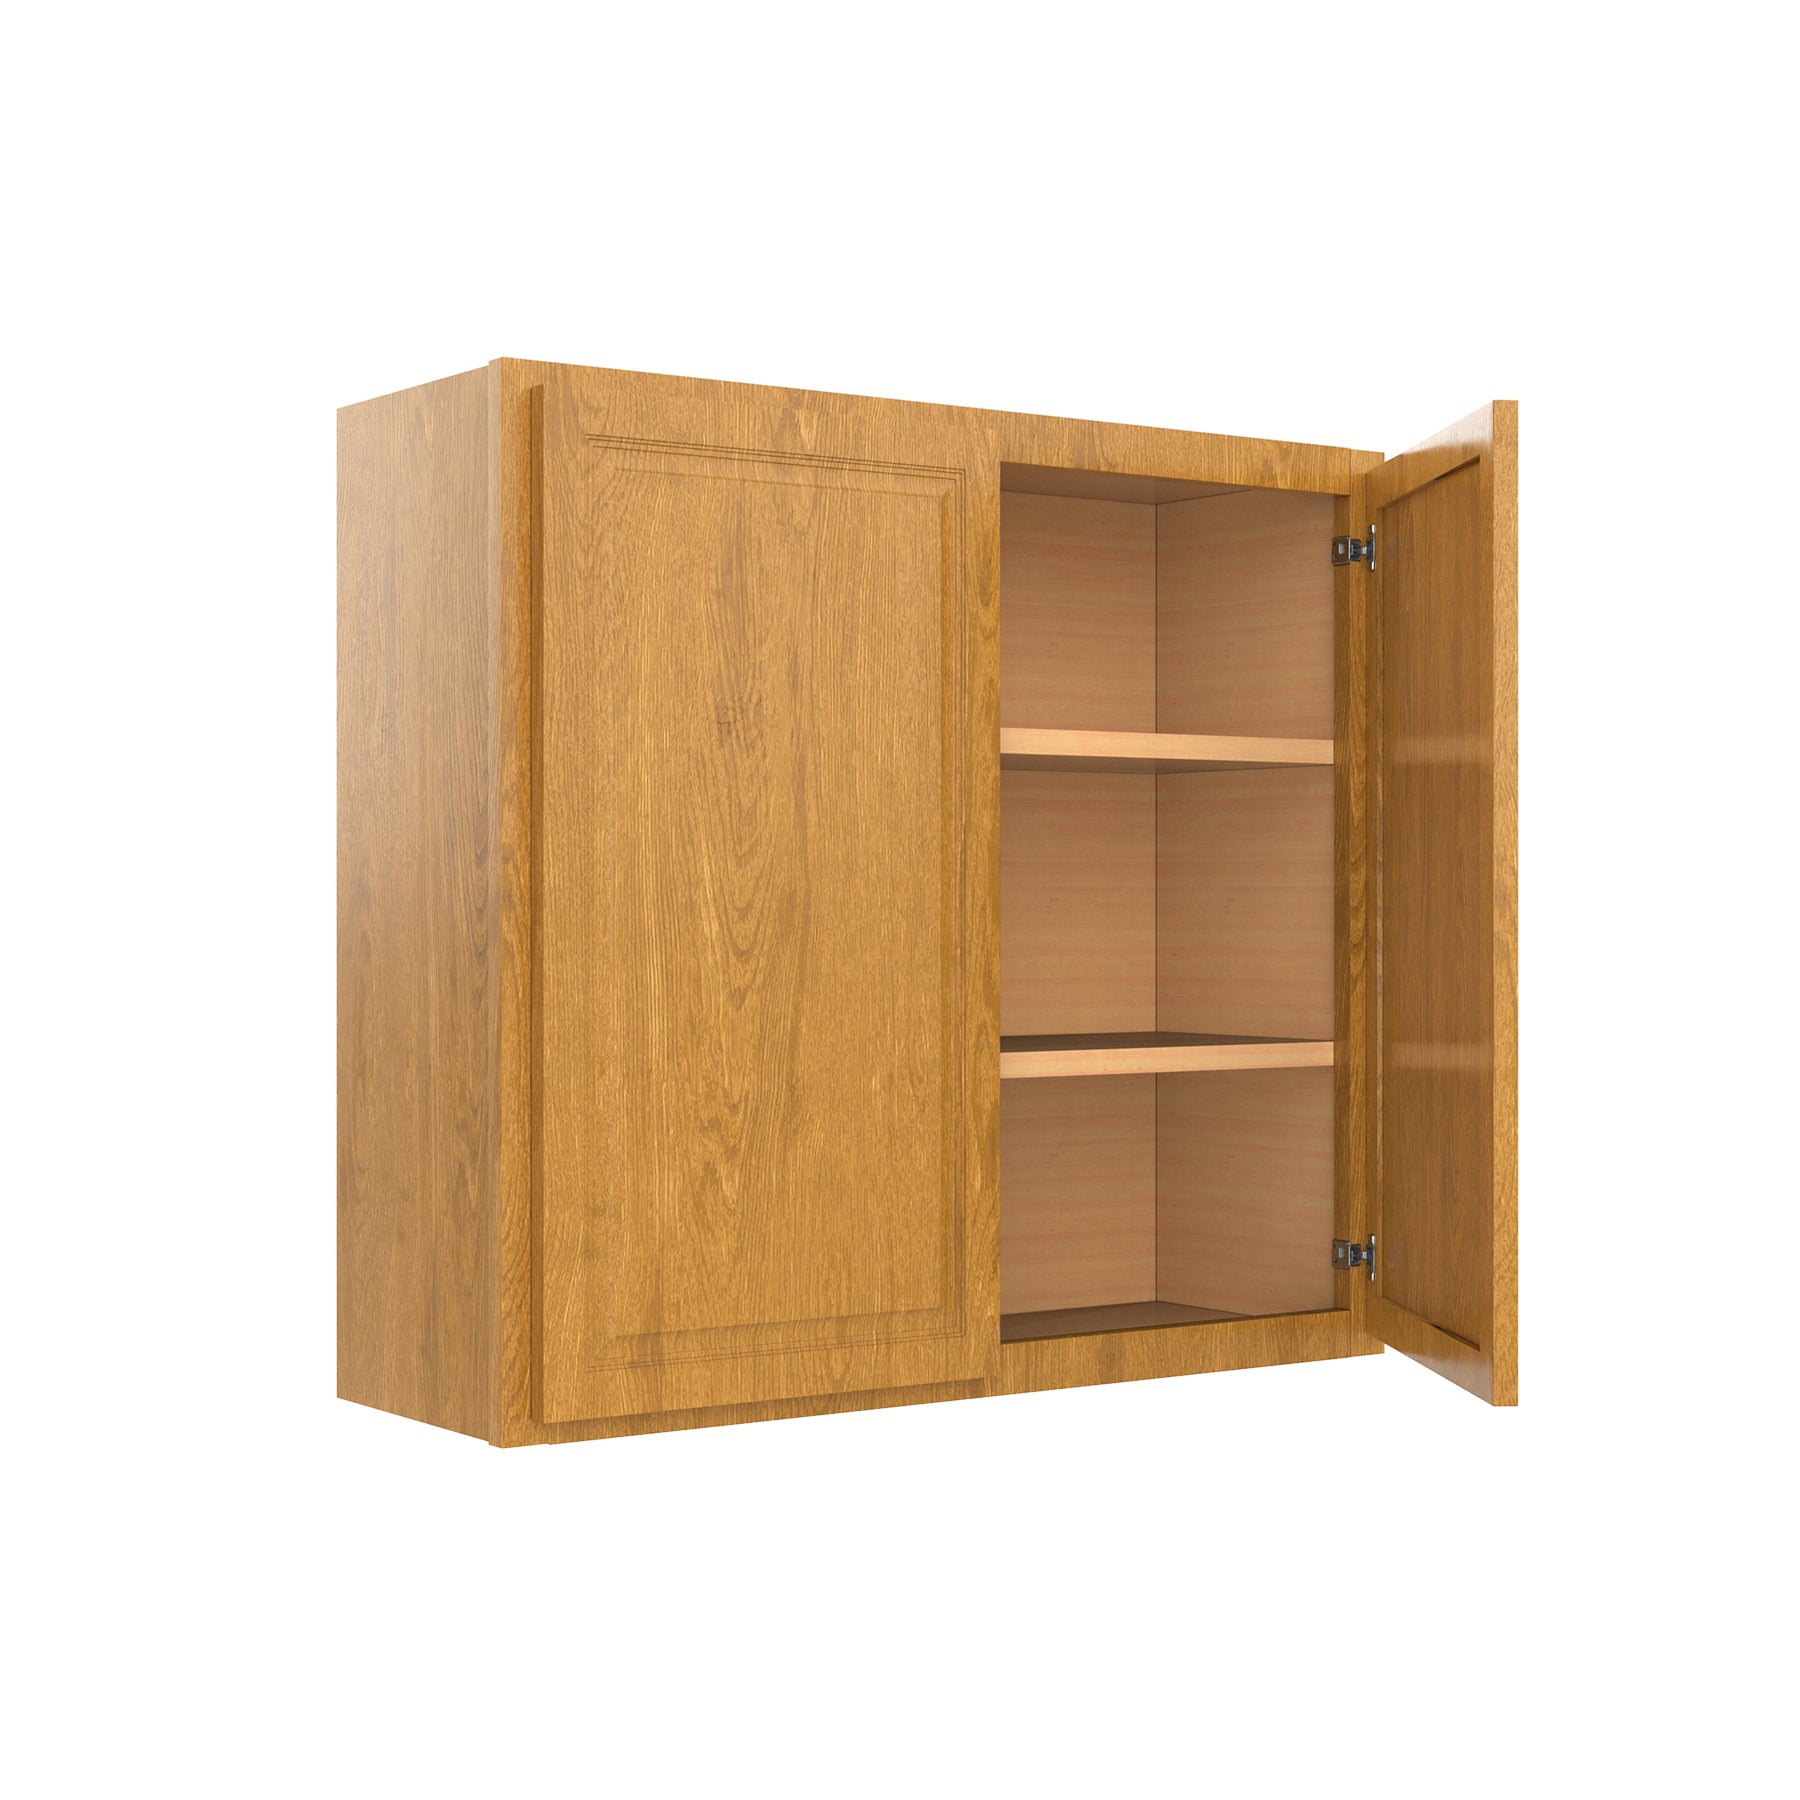 Country Oak 33"W x 30"H Wall Cabinet